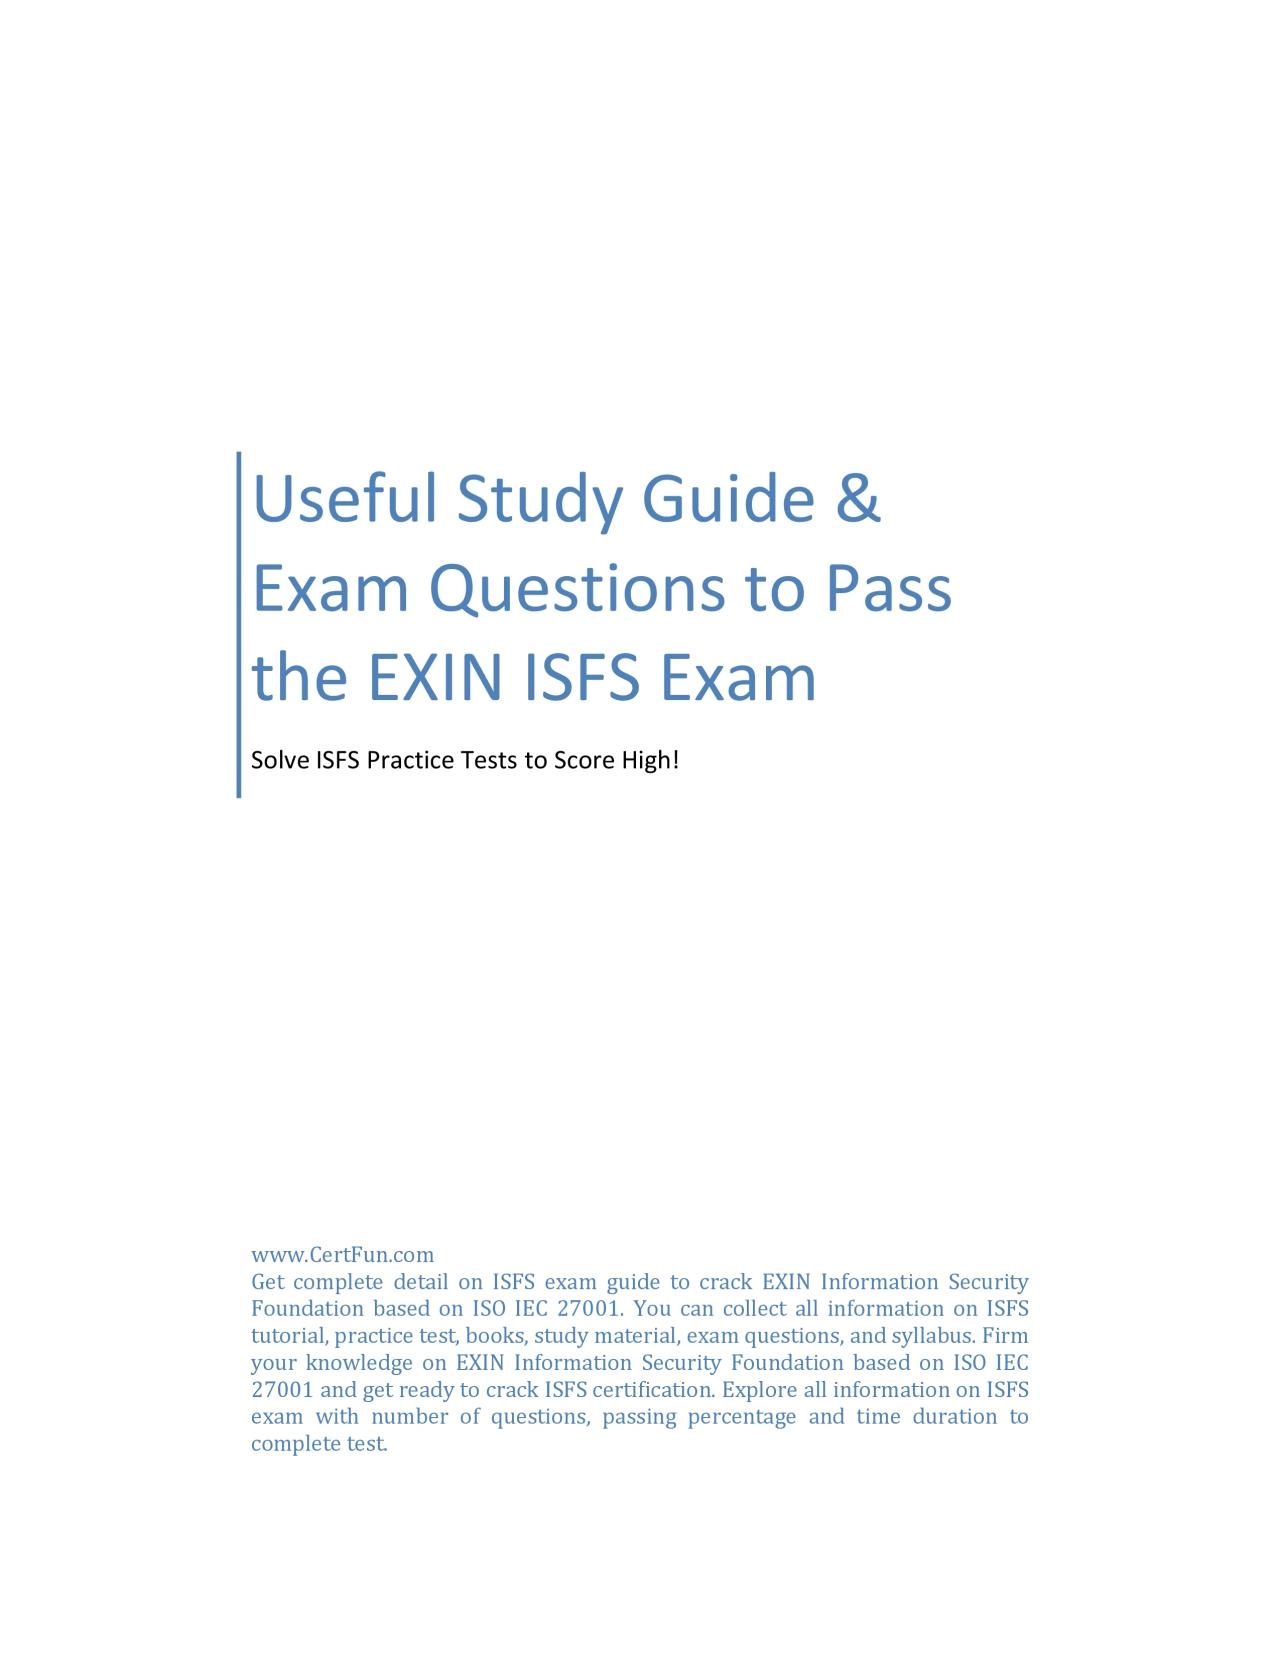 Useful Study Guide & Exam Questions to Pass the EXIN ISFS Exam